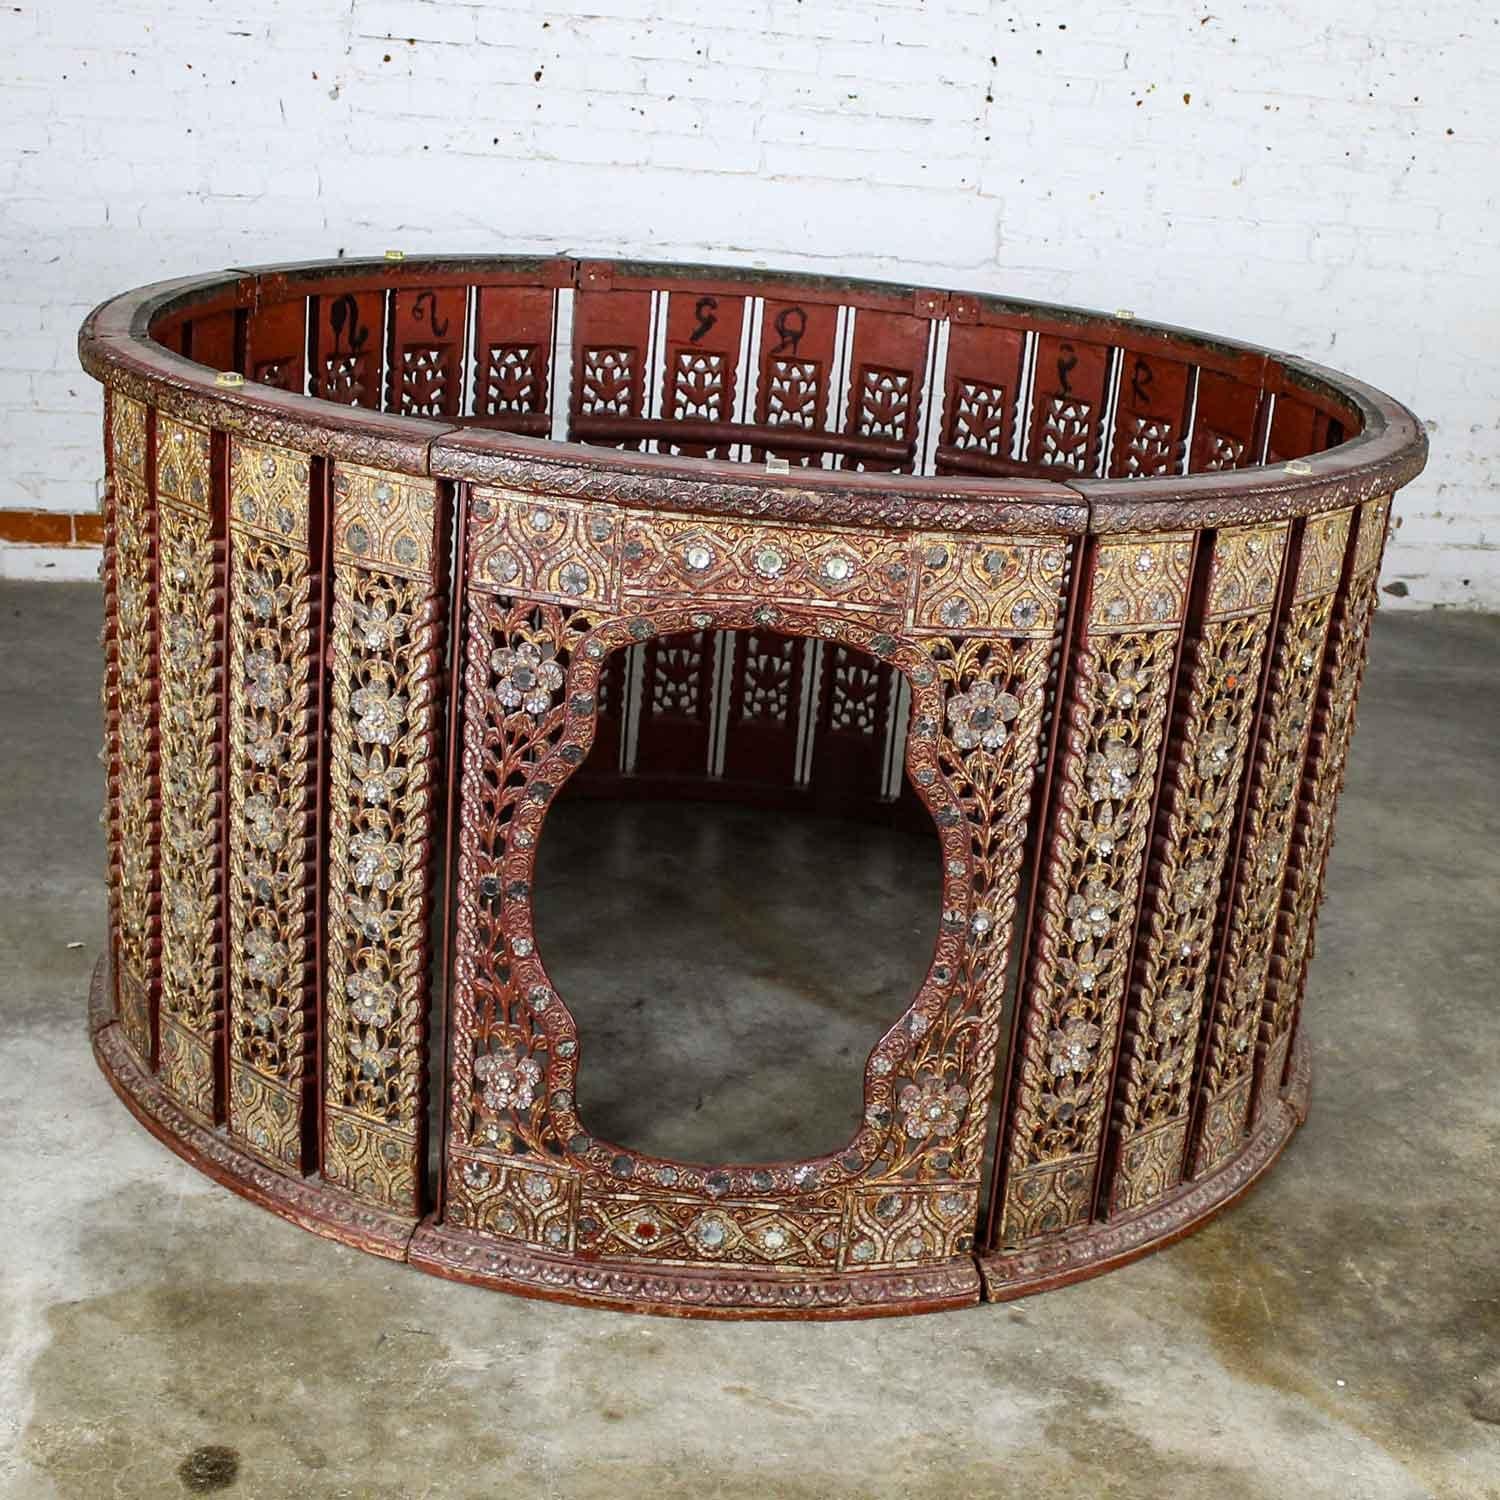 Chinoiserie Antique Burmese Orchestra Hsian Wain Drum/Percussion Circle Carved Panel Table For Sale